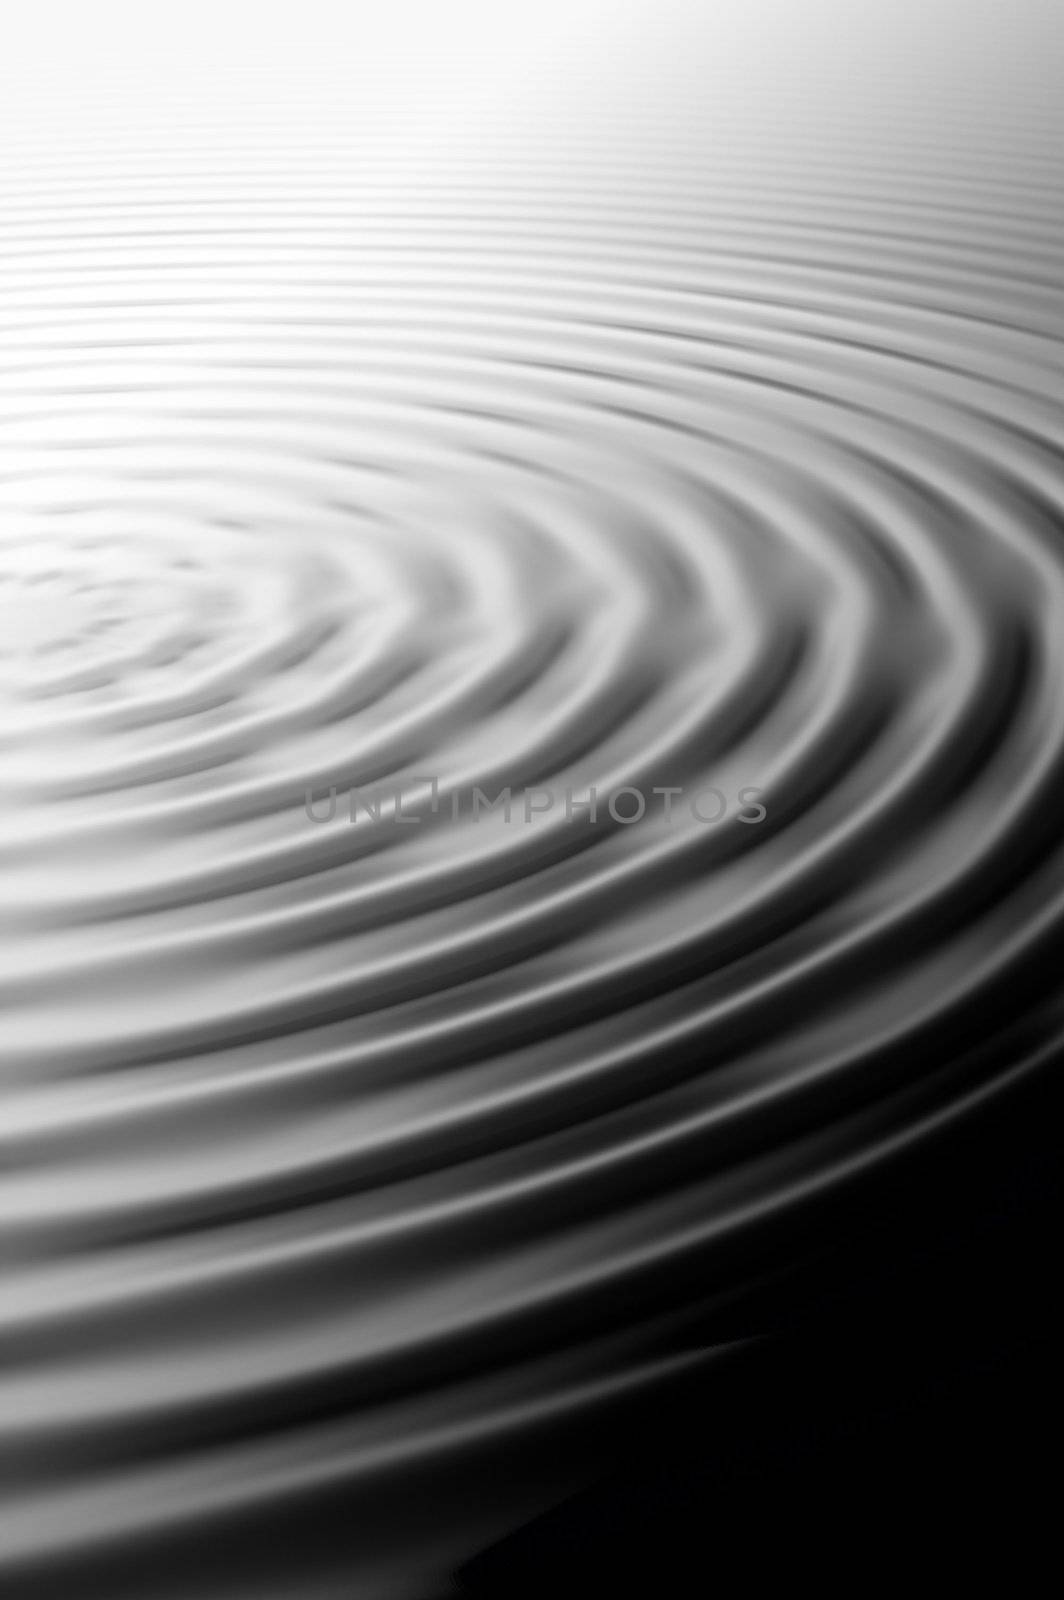 An Arty Photoshop Water Ripple Illustration in Black and White